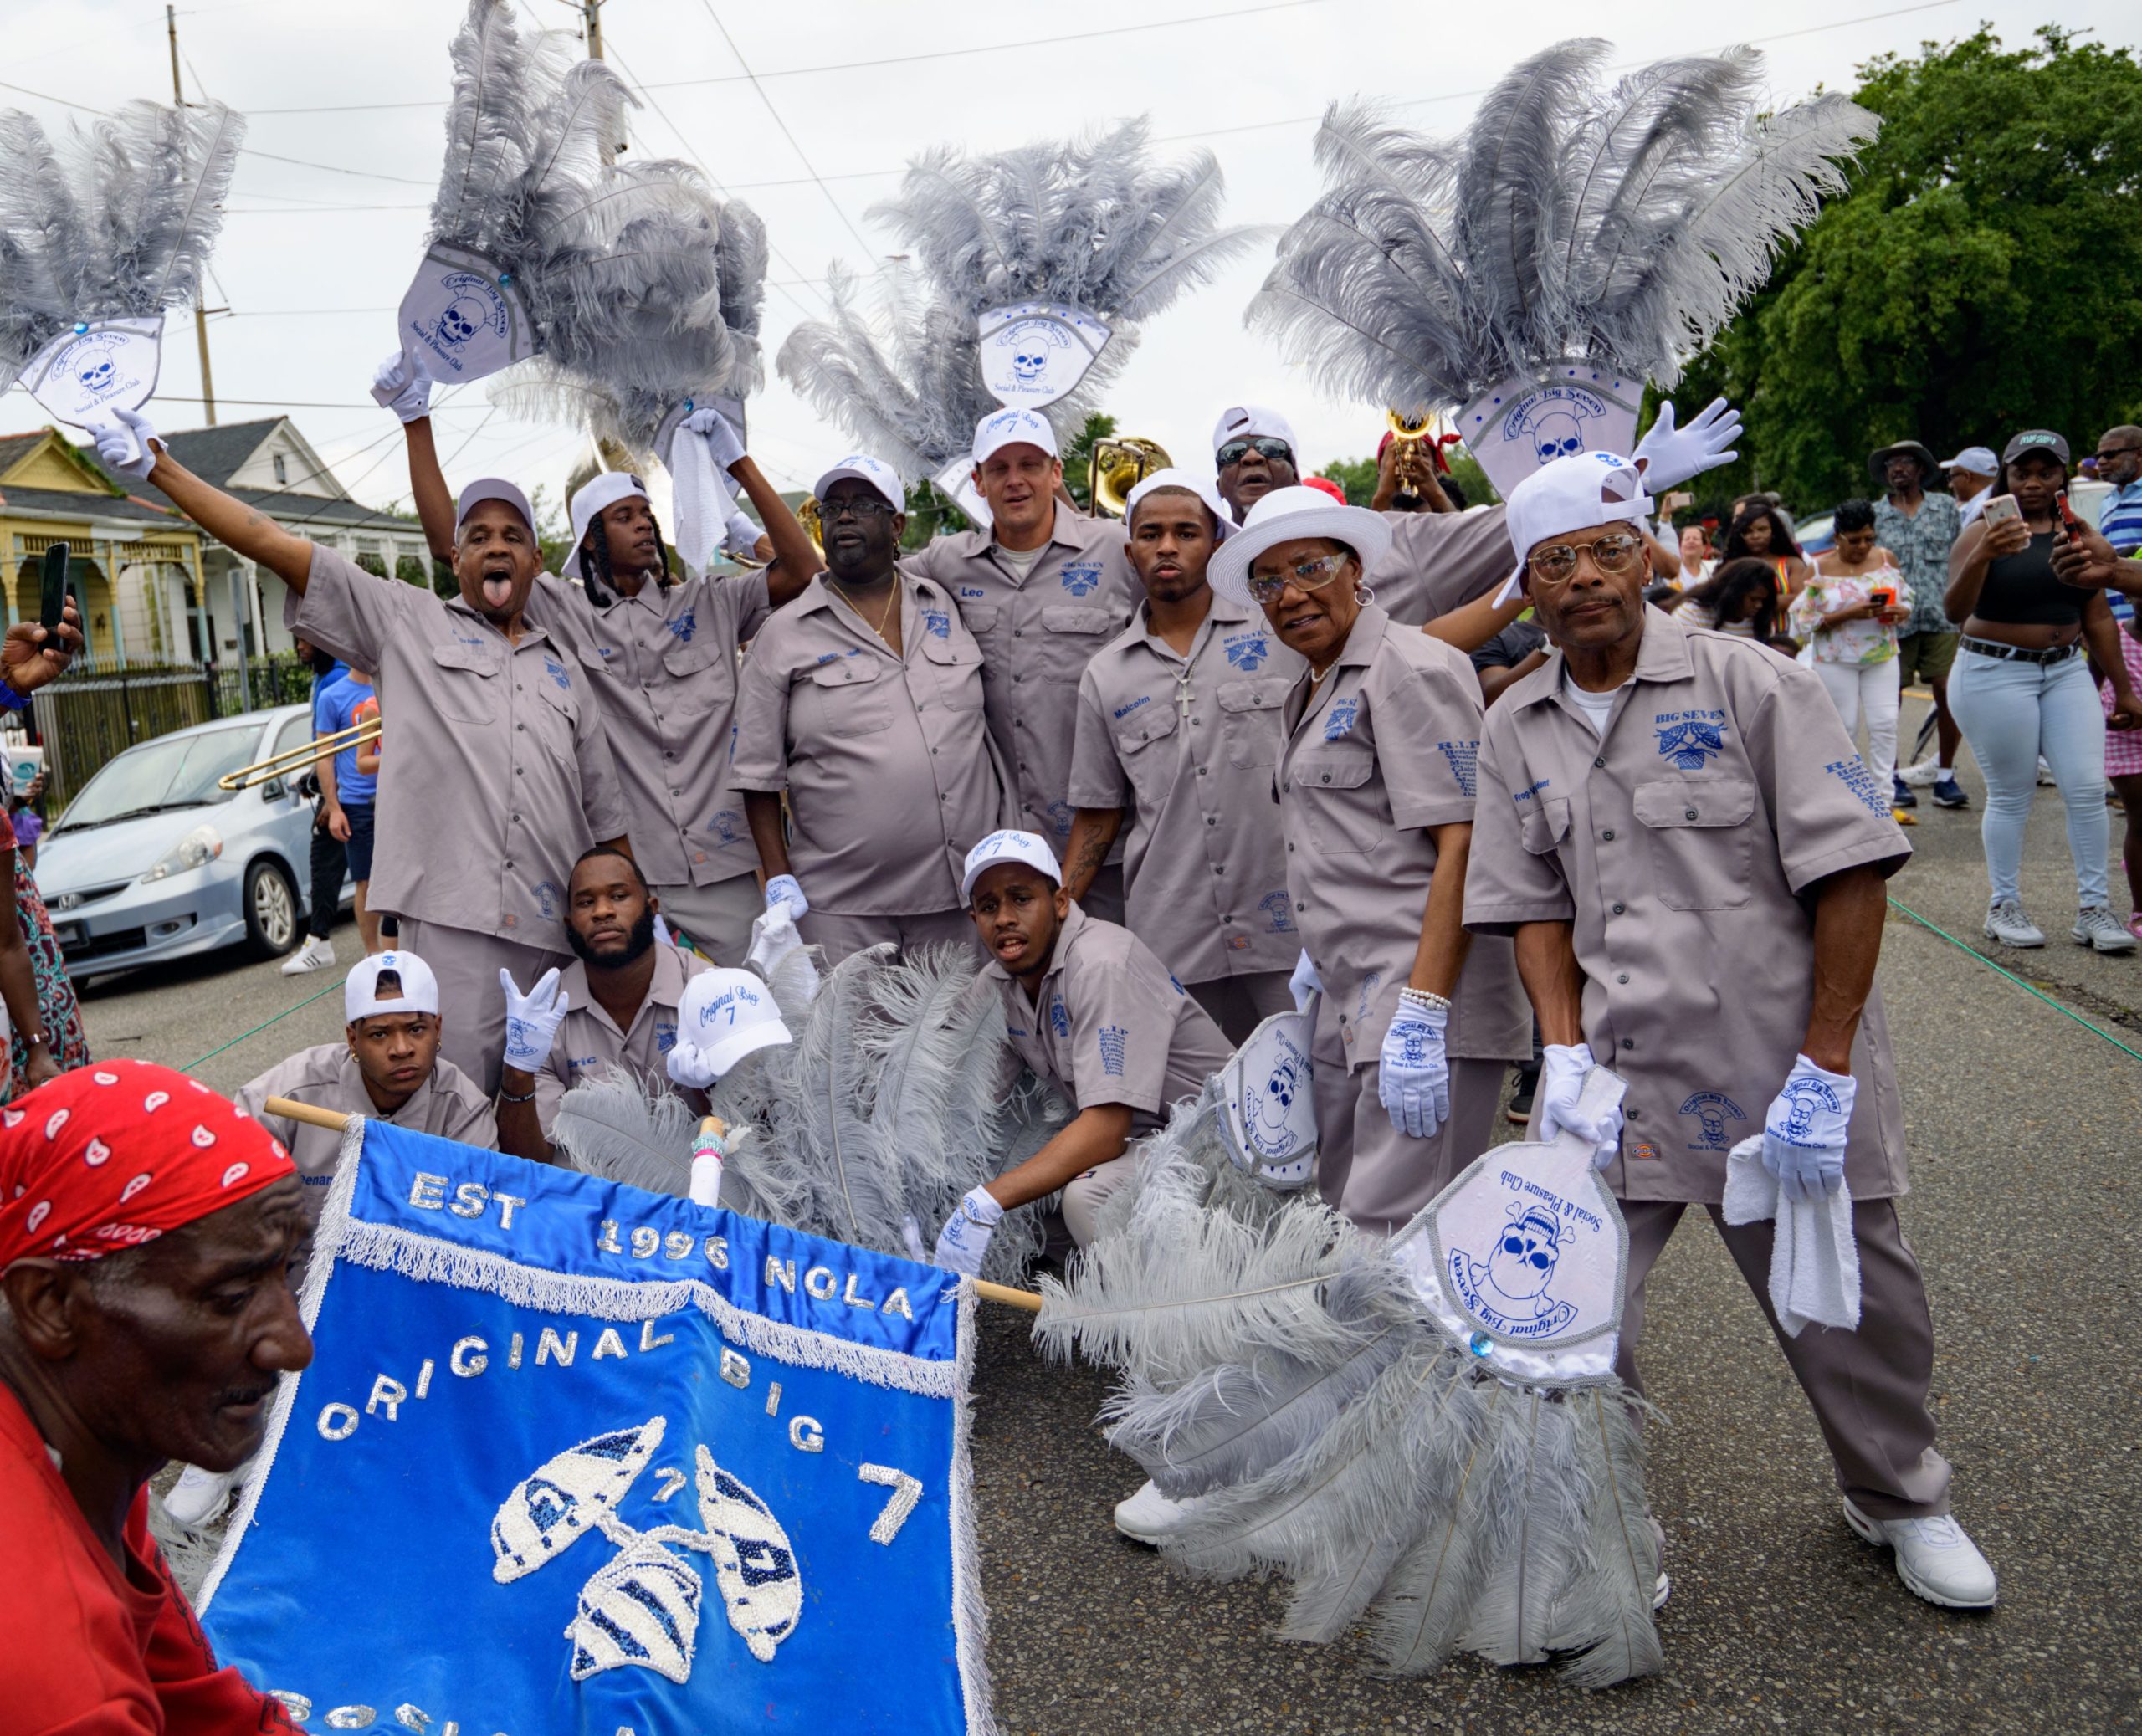 Though thunderstorms threatened early in the morning Sunday, Mother's Day still proved to be festive with the 23rd annual Mother's Day Second Line by the Original Big 7 Social Aid and Pleasure Club and the previously rain postponed Downtown Super Sunday for the Mardi Gras Indians in the 7th Ward in New Orleans, La. Sunday, May 12, 2019. The Big 7 was lead by Ed Buckner with the three divisions and the All for One Brass Band.  Photo by Matthew Hinton